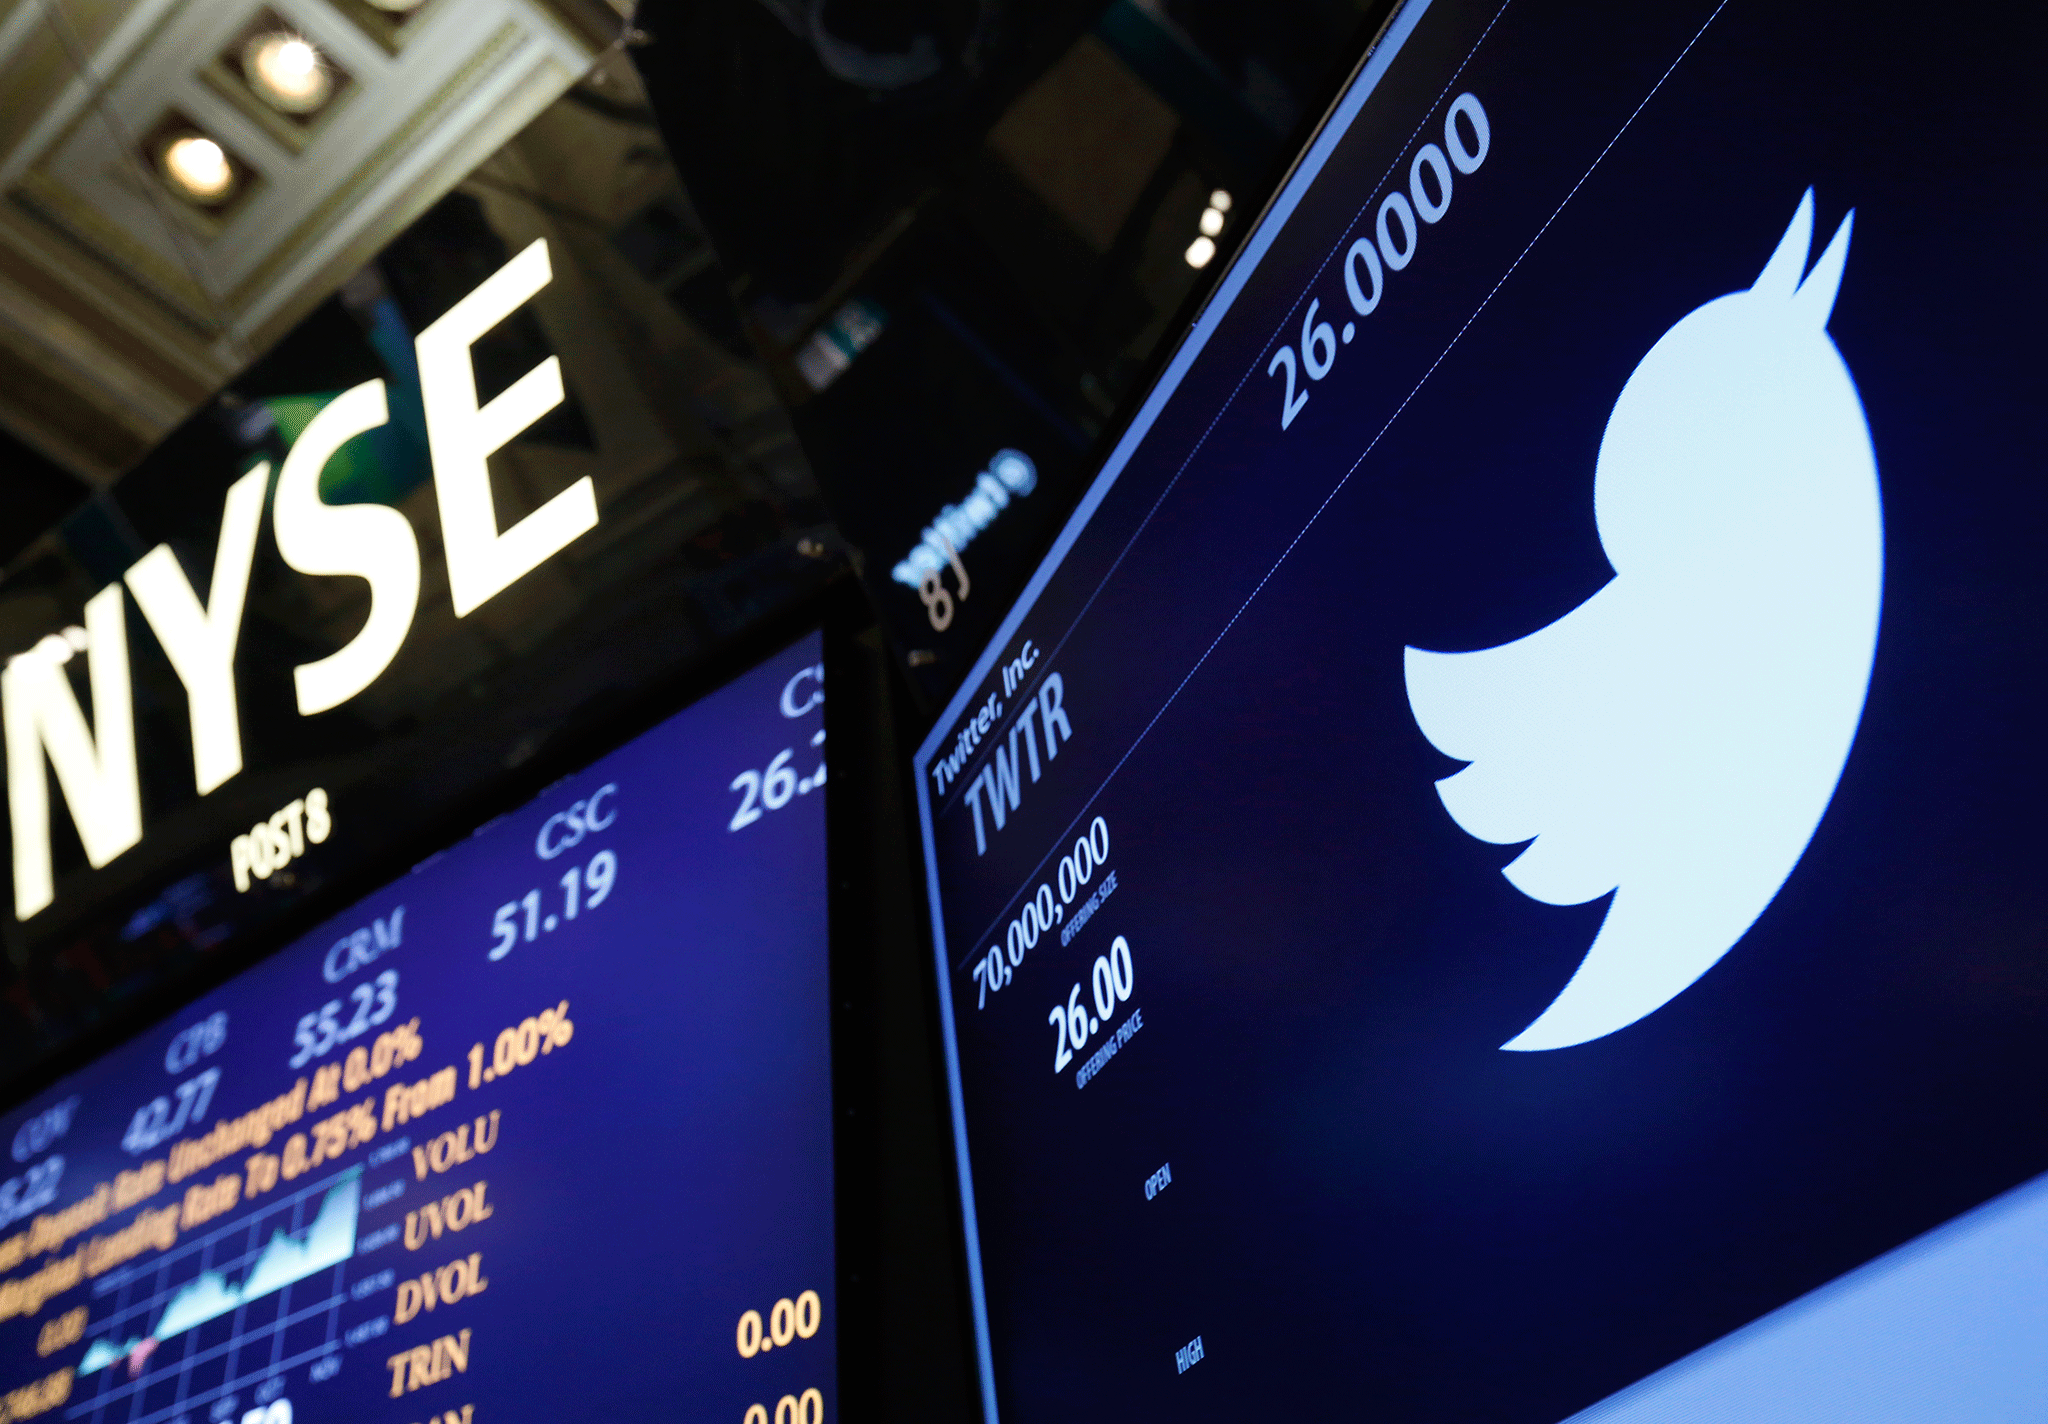 Twitter said it would "continue to act" to deal with the problem